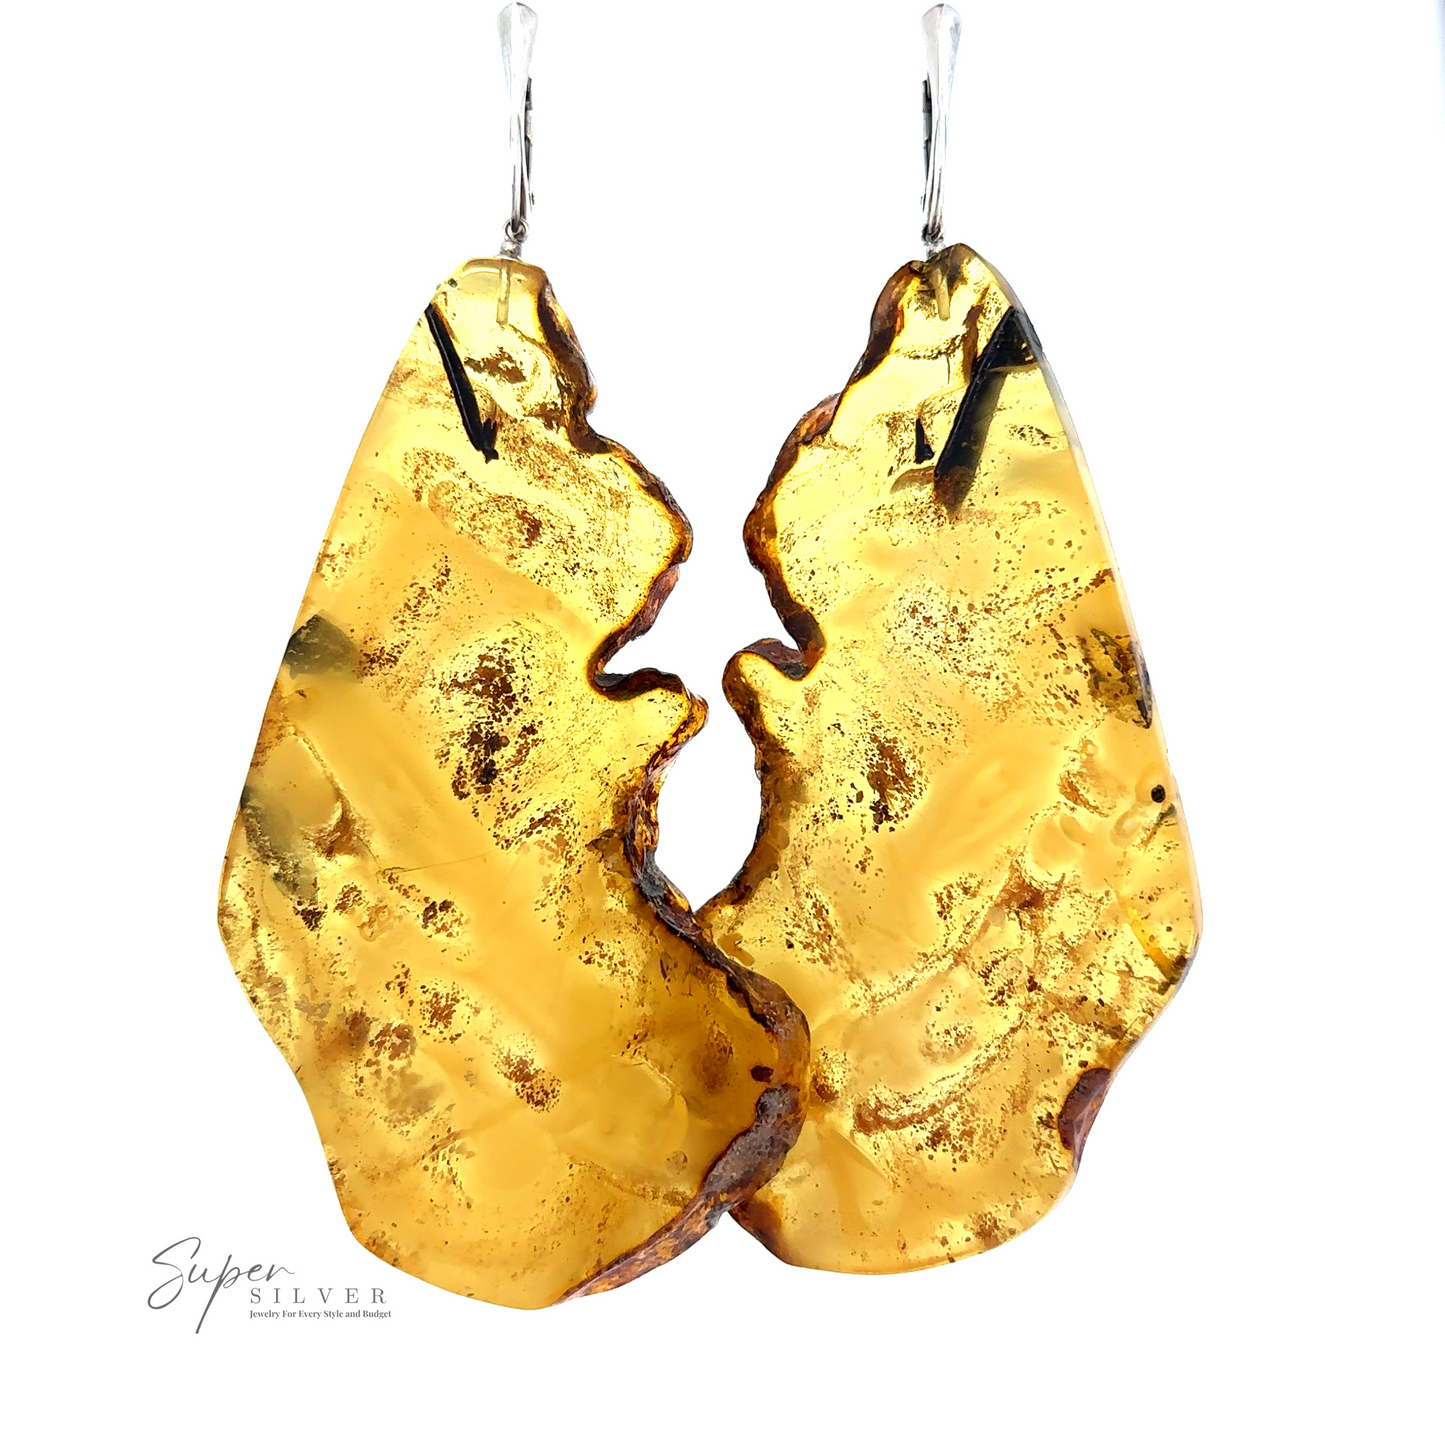 A pair of large, handcrafted Designer Raw Cognac Amber Slab Earrings with an irregular shape, suspended by sterling silver hooks. The logo "Super Silver" is visible in the lower left corner.